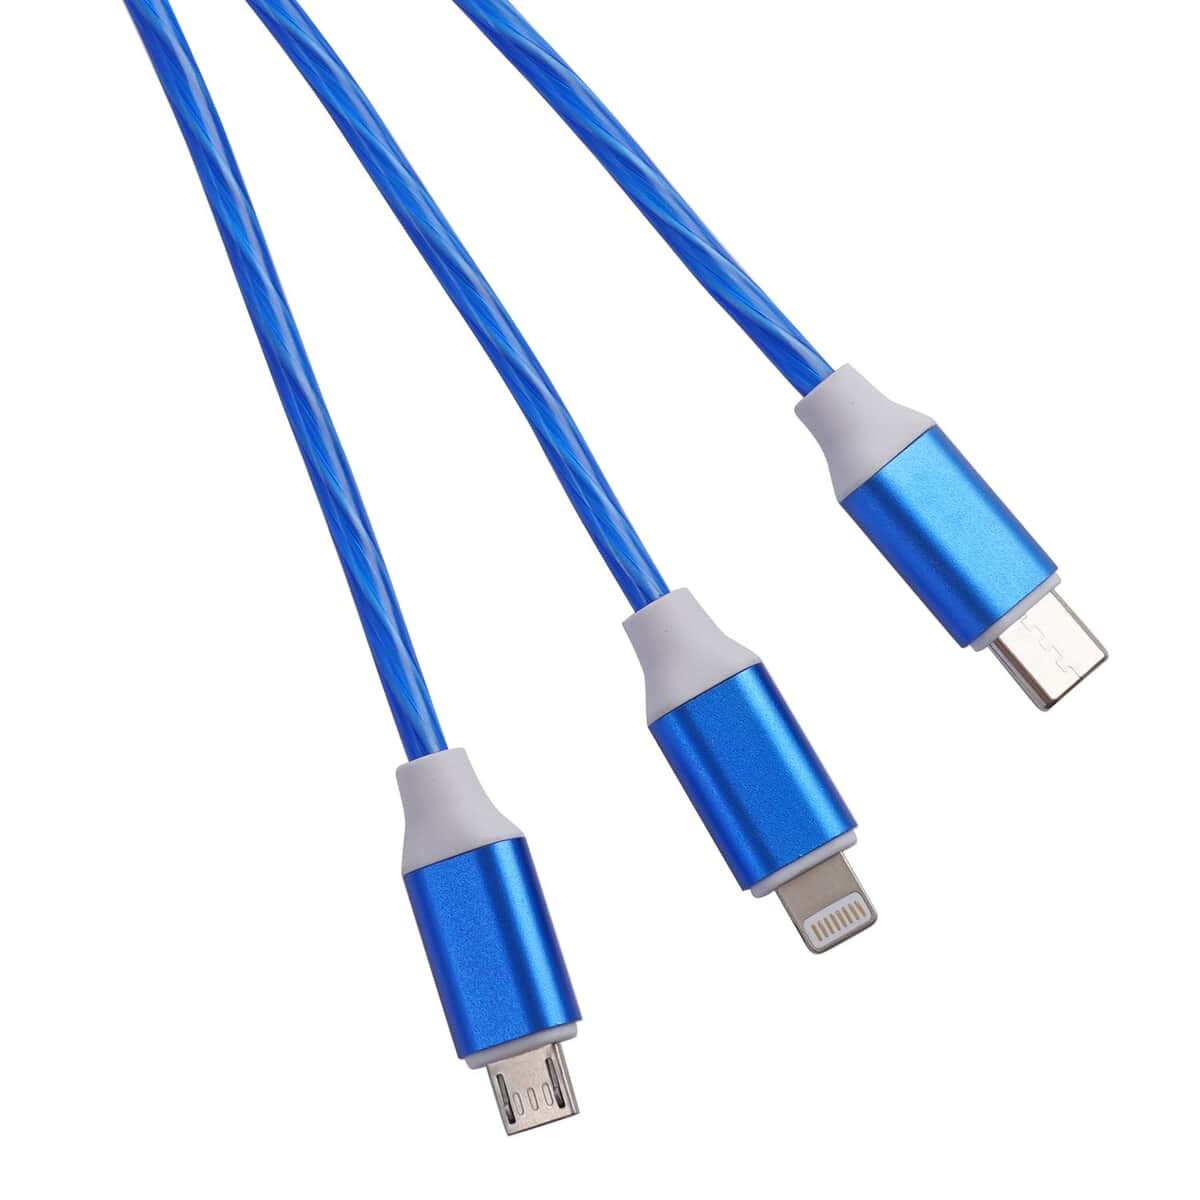 2pcs Set 3 in 1 Light Moving Charging Cable - Blue image number 3